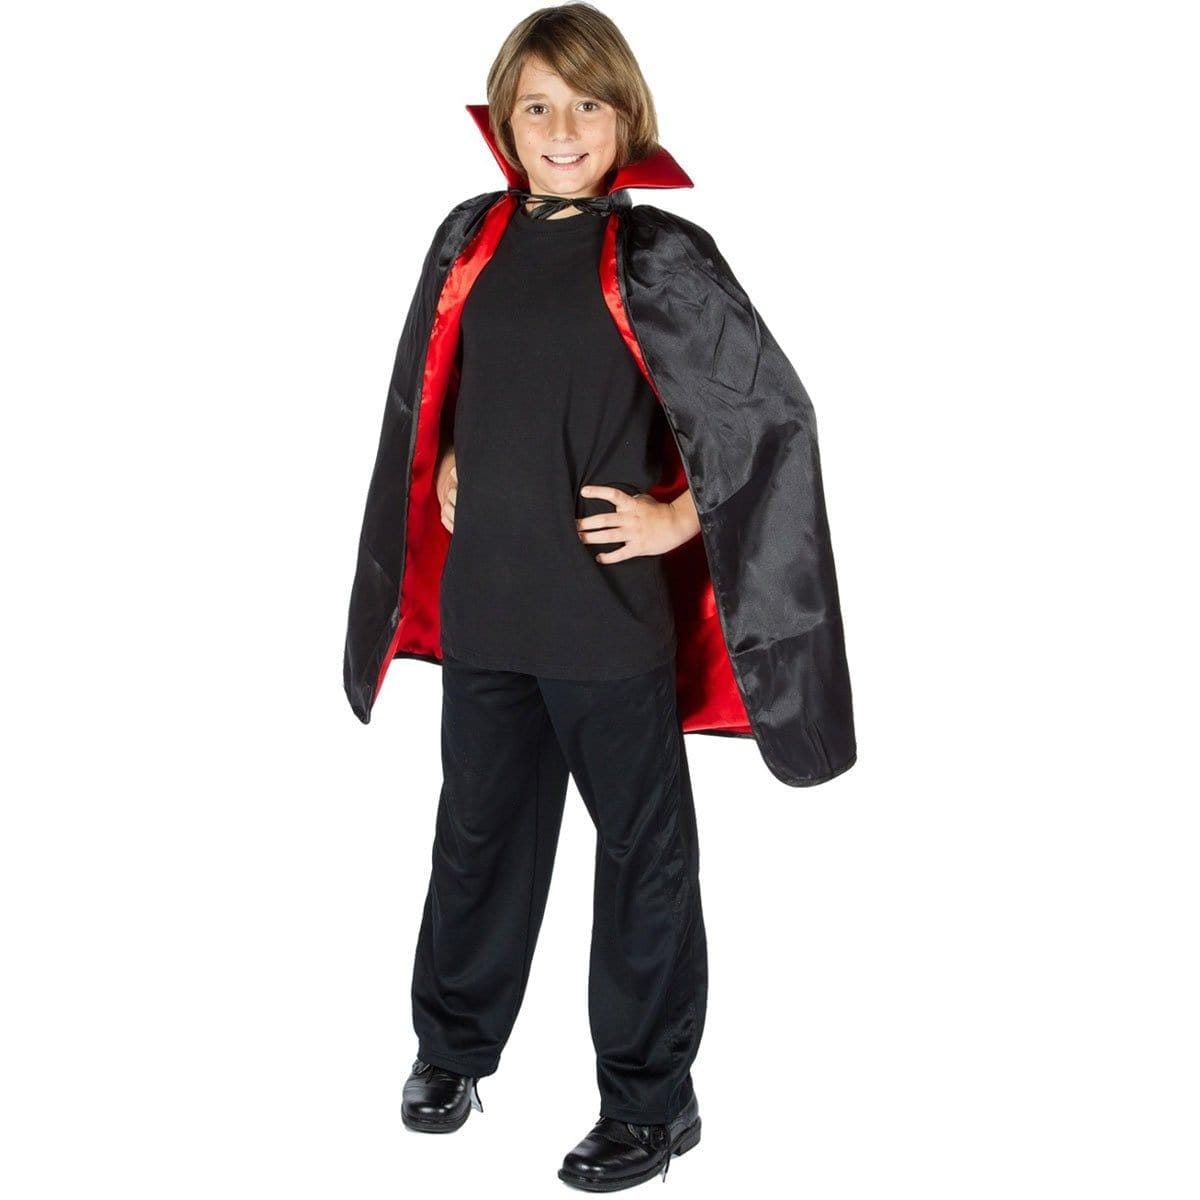 Buy Costume Accessories Red & Black Reversible Cape with Collar sold at Party Expert